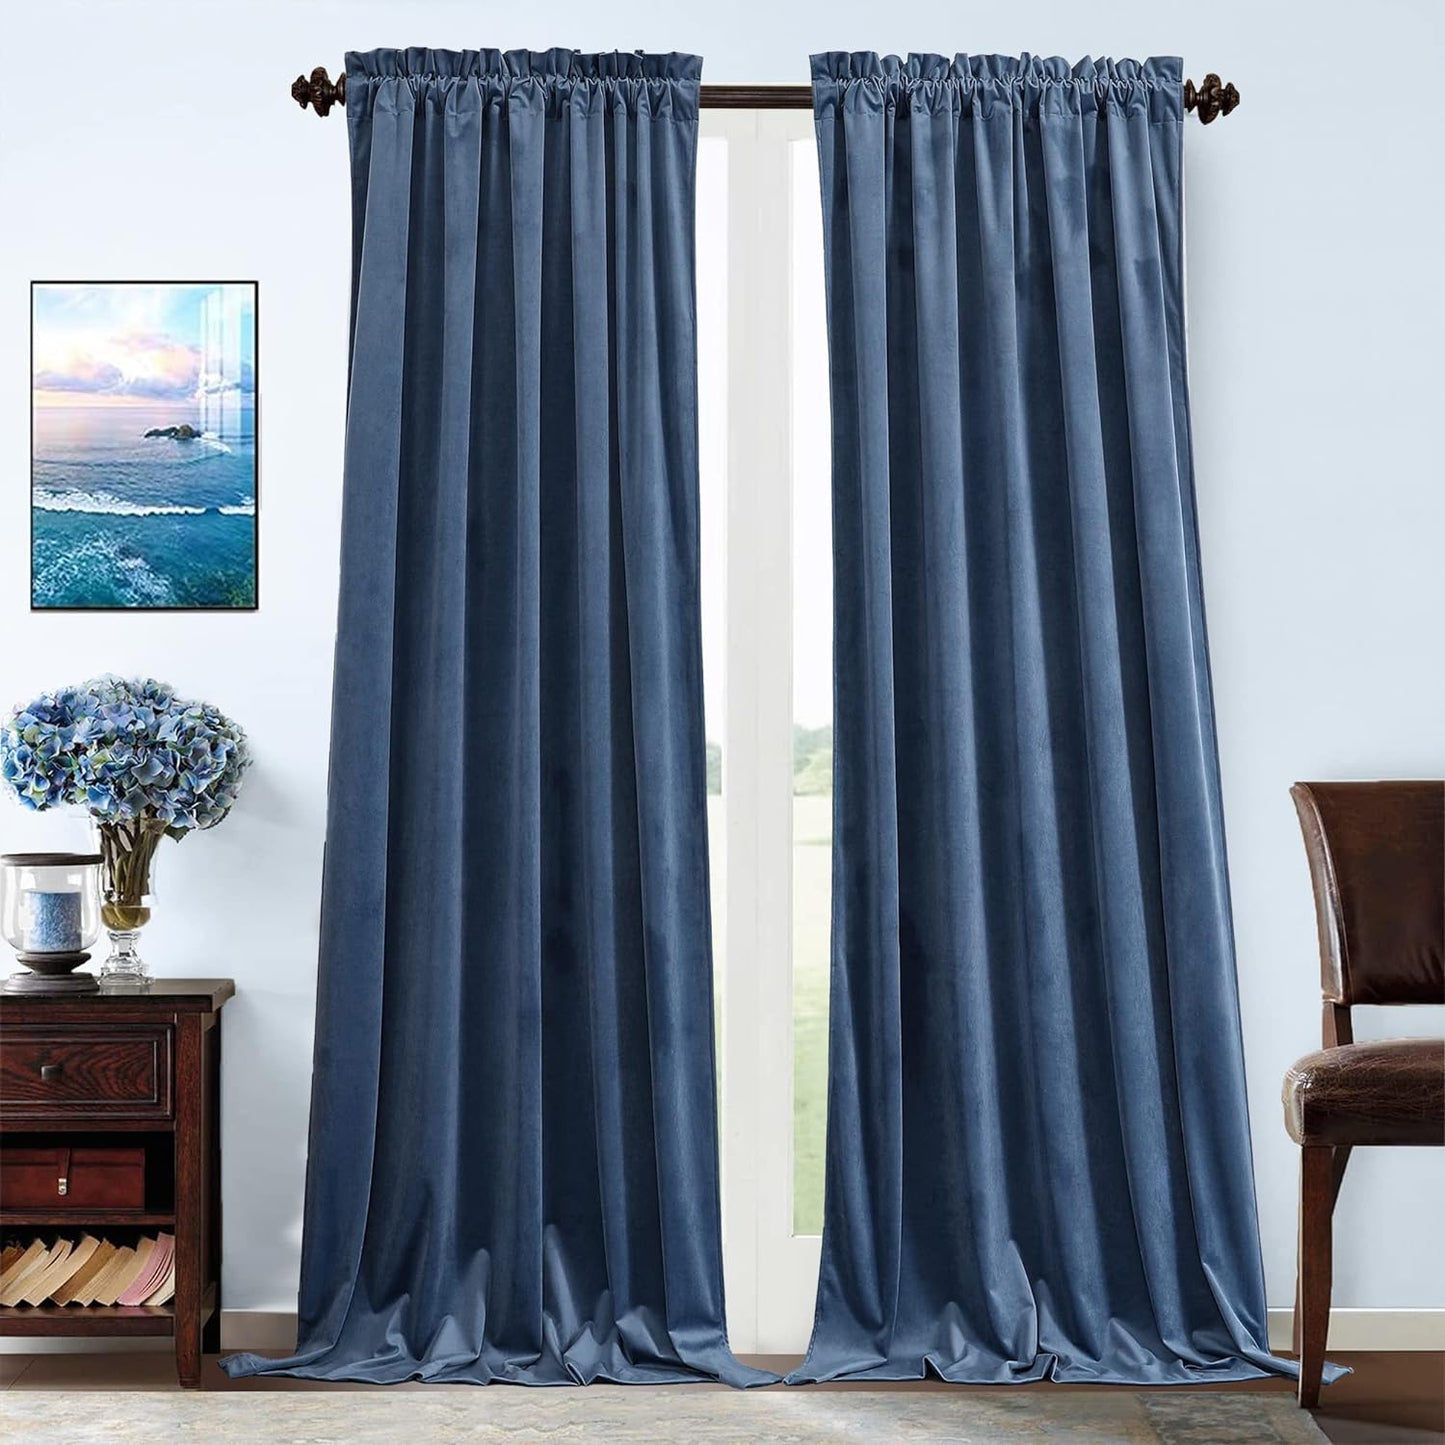 Benedeco Green Velvet Curtains for Bedroom Window, Super Soft Luxury Drapes, Room Darkening Thermal Insulated Rod Pocket Curtain for Living Room, W52 by L84 Inches, 2 Panels  Benedeco Ocean Blue W52 * L108 | 2 Panels 